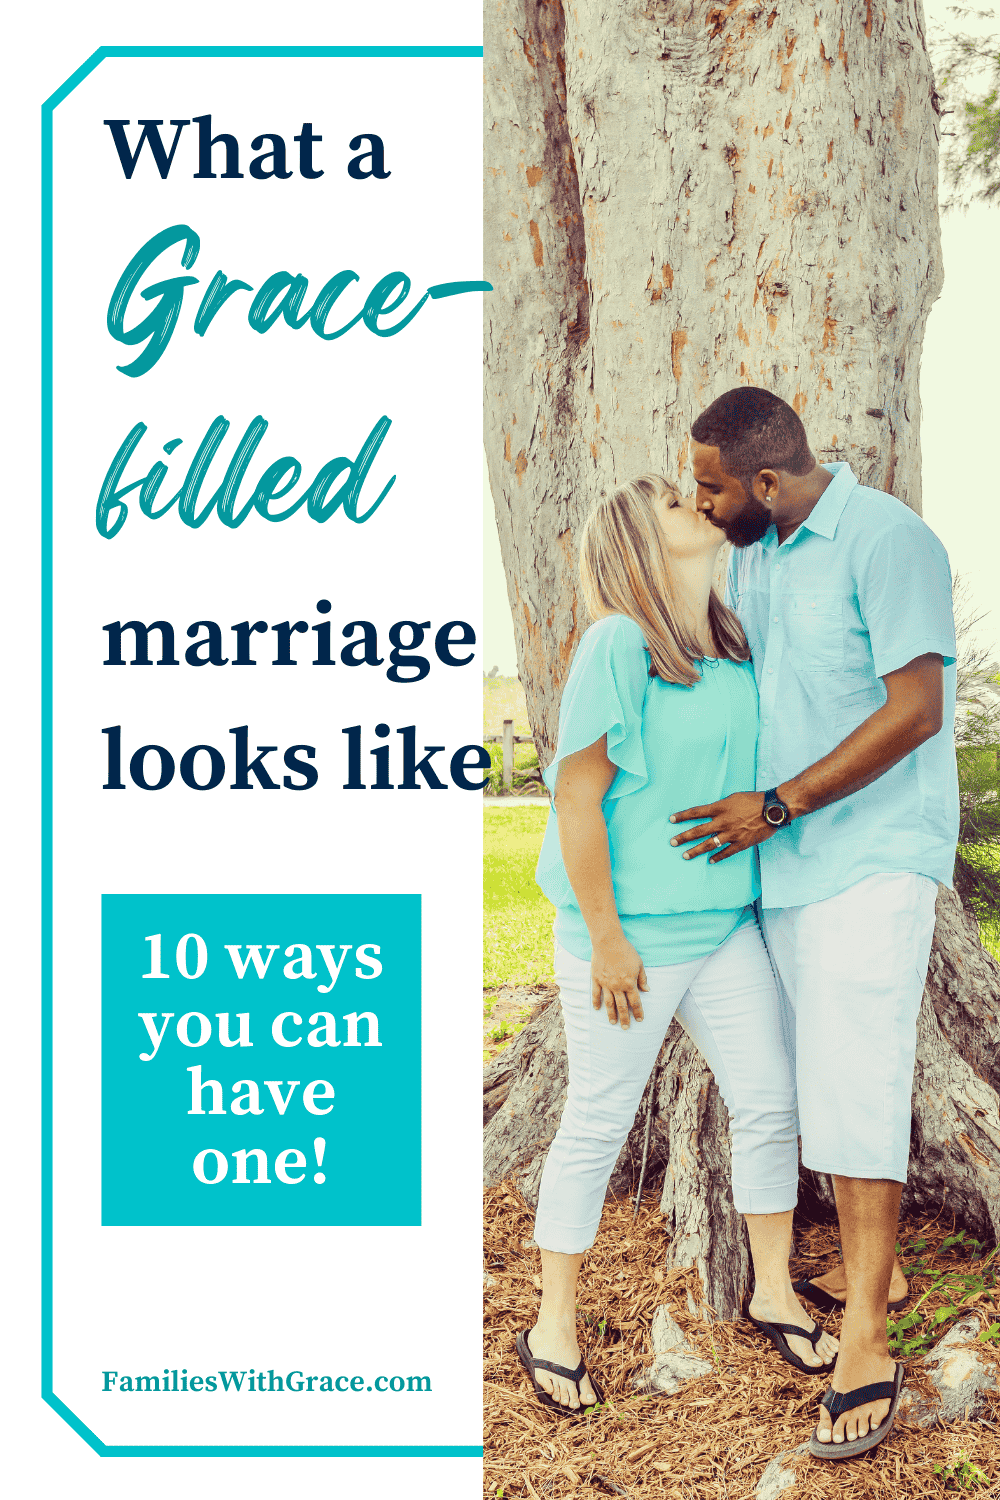 Christian marriage advice for a grace-filled relationship